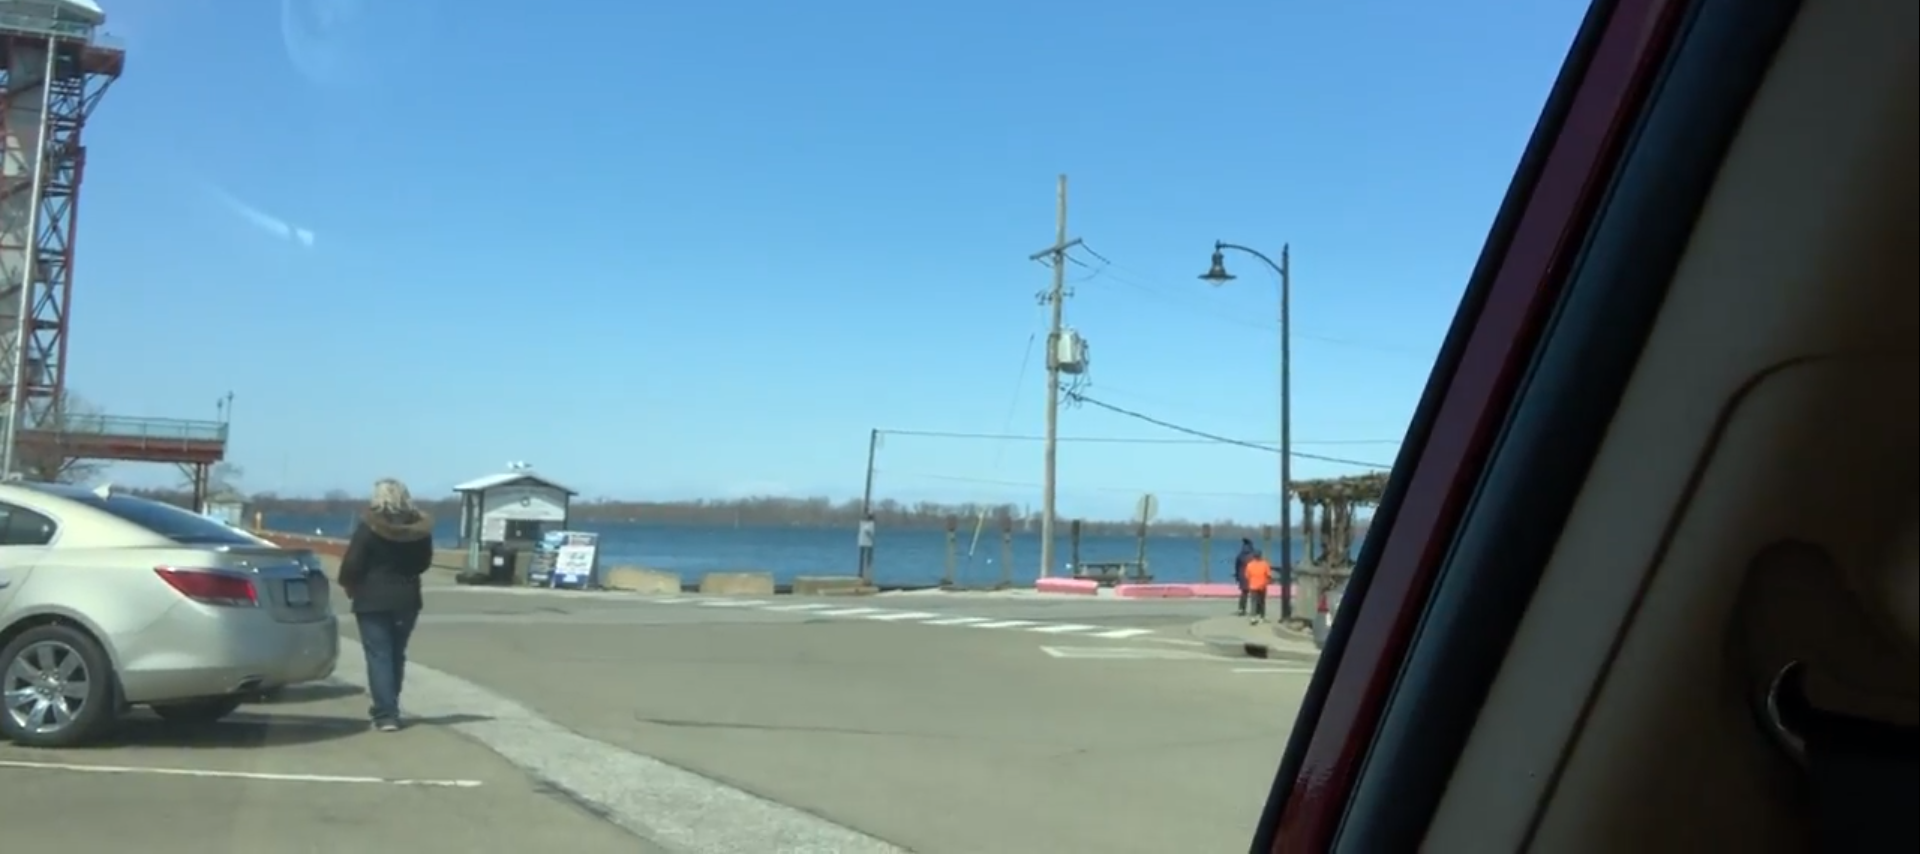 In a video on April 11, 2020, Andrew Cousins shows a view of Presque Isle Bay. 